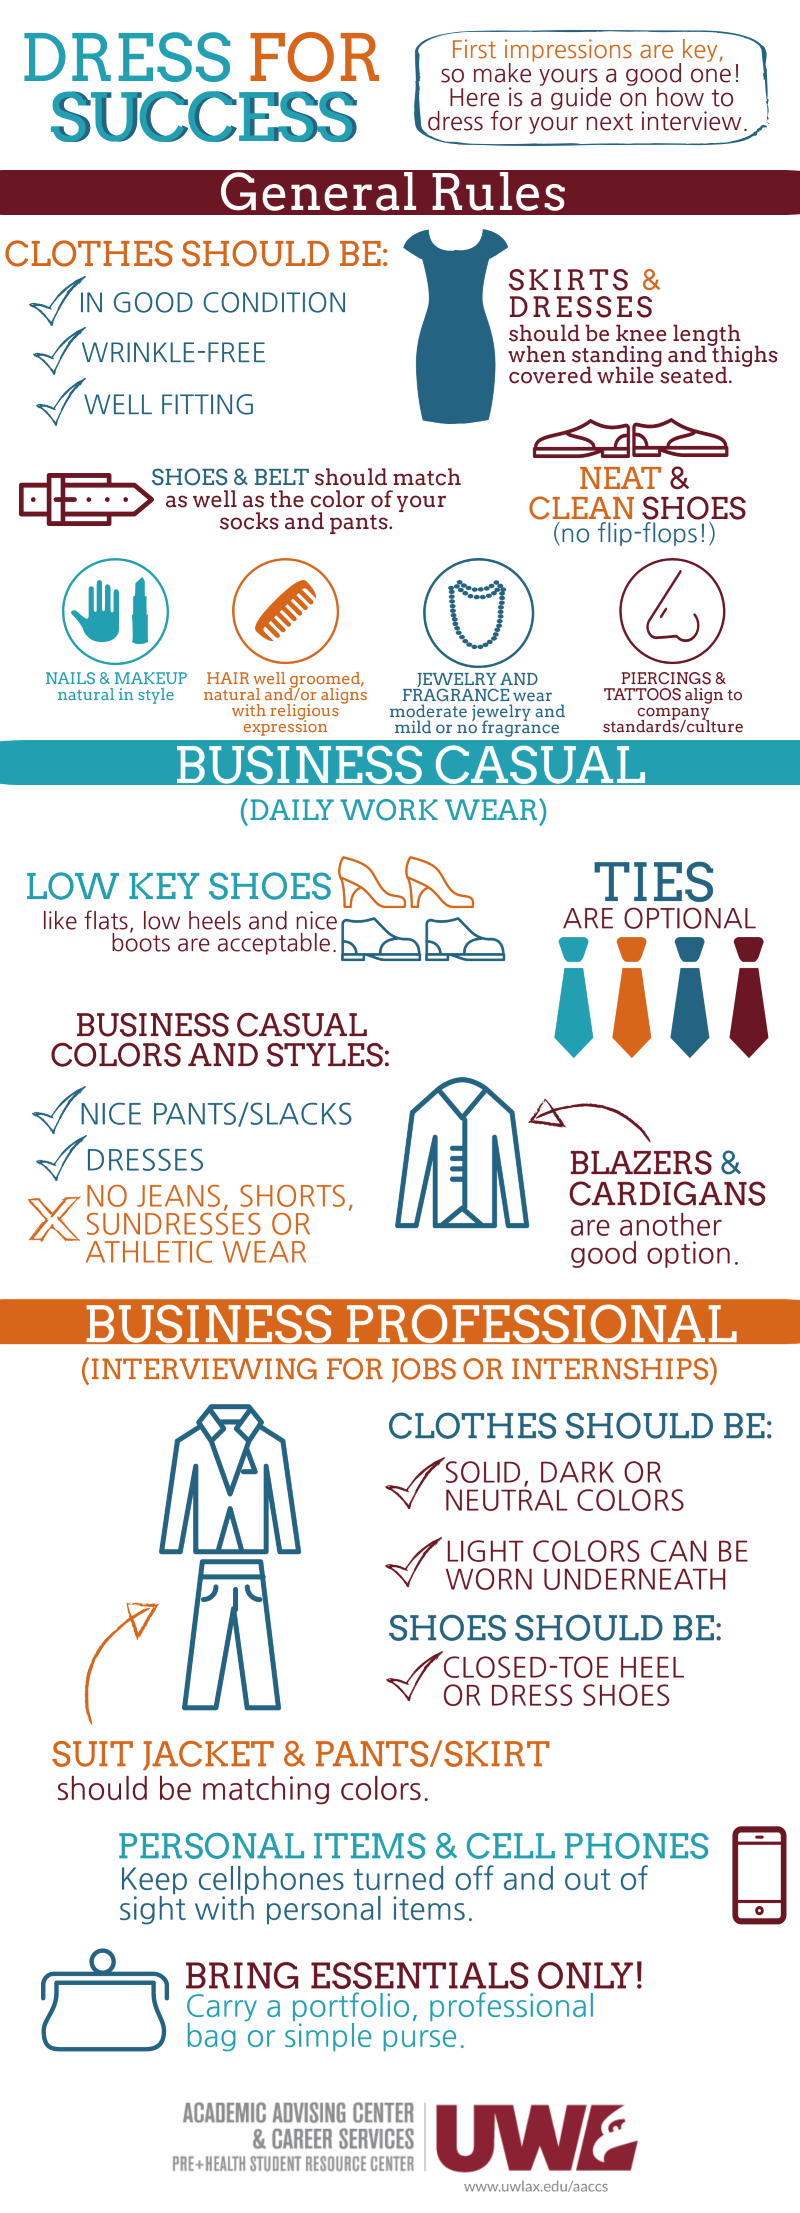 Dress for success guide